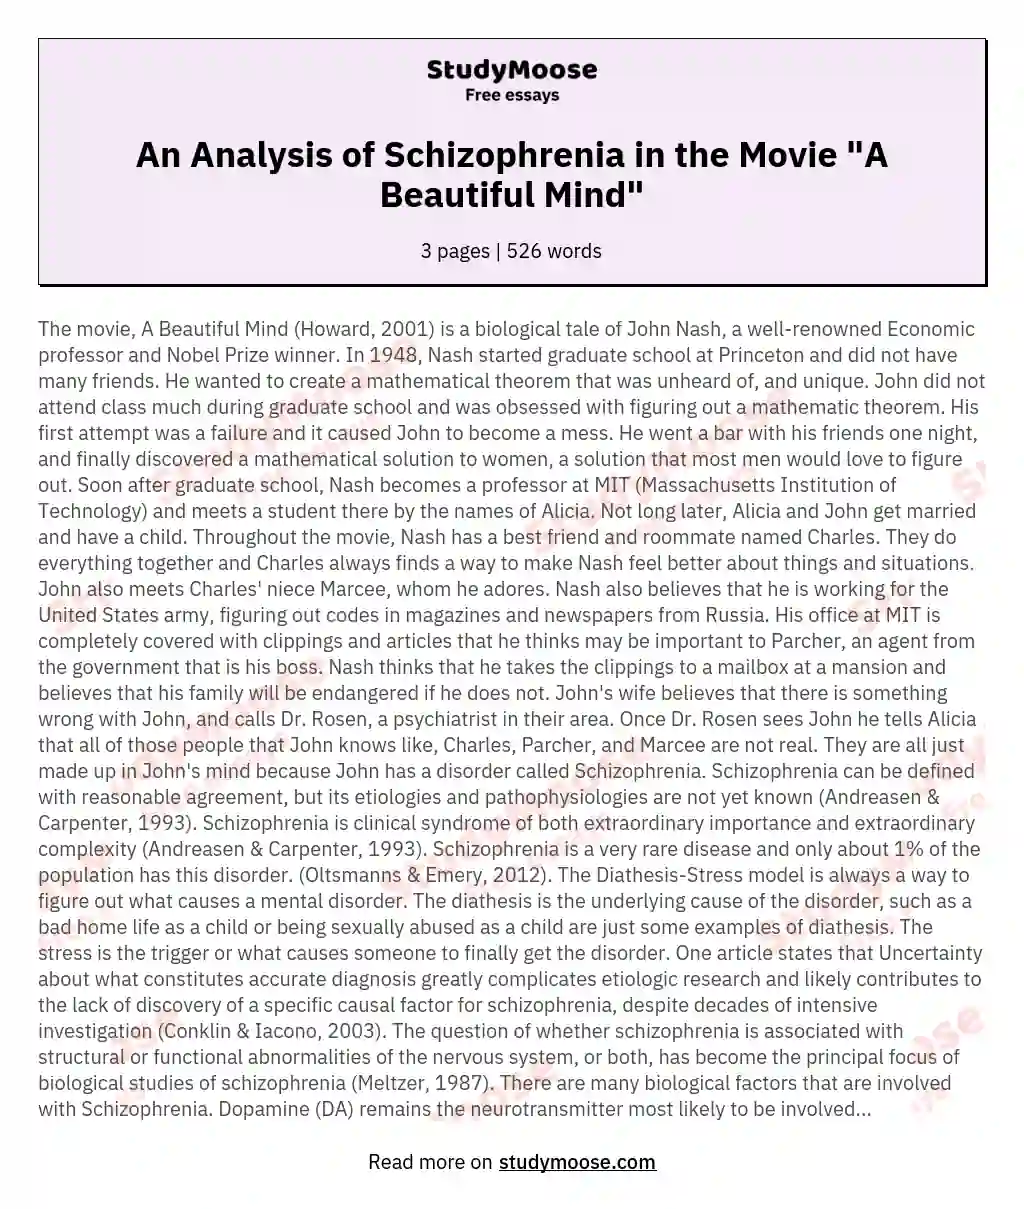 An Analysis of Schizophrenia in the Movie "A Beautiful Mind" essay